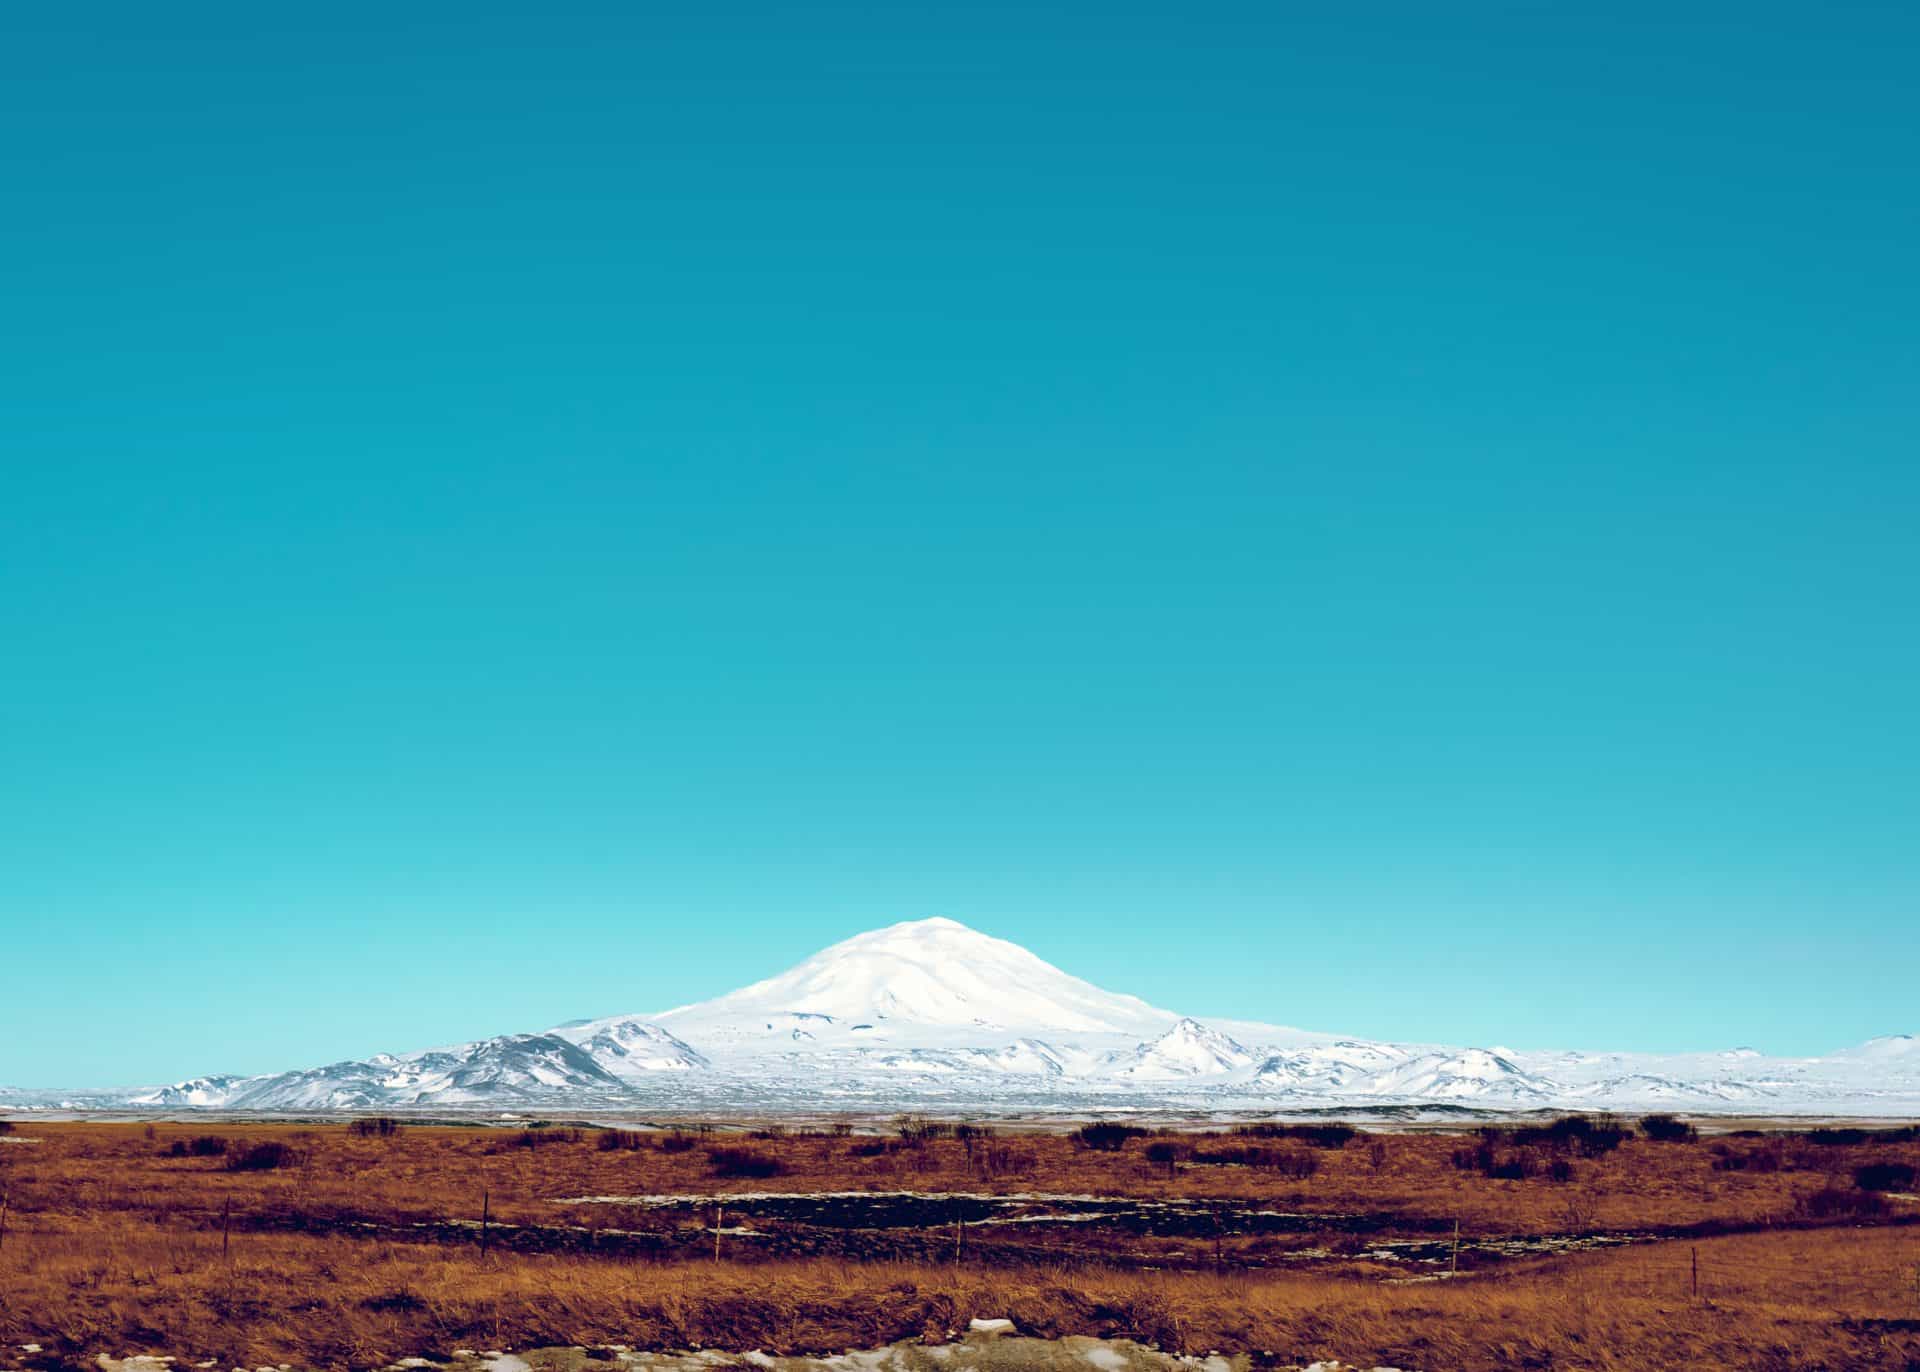 South Iceland's Hekla volcano covered in snow.